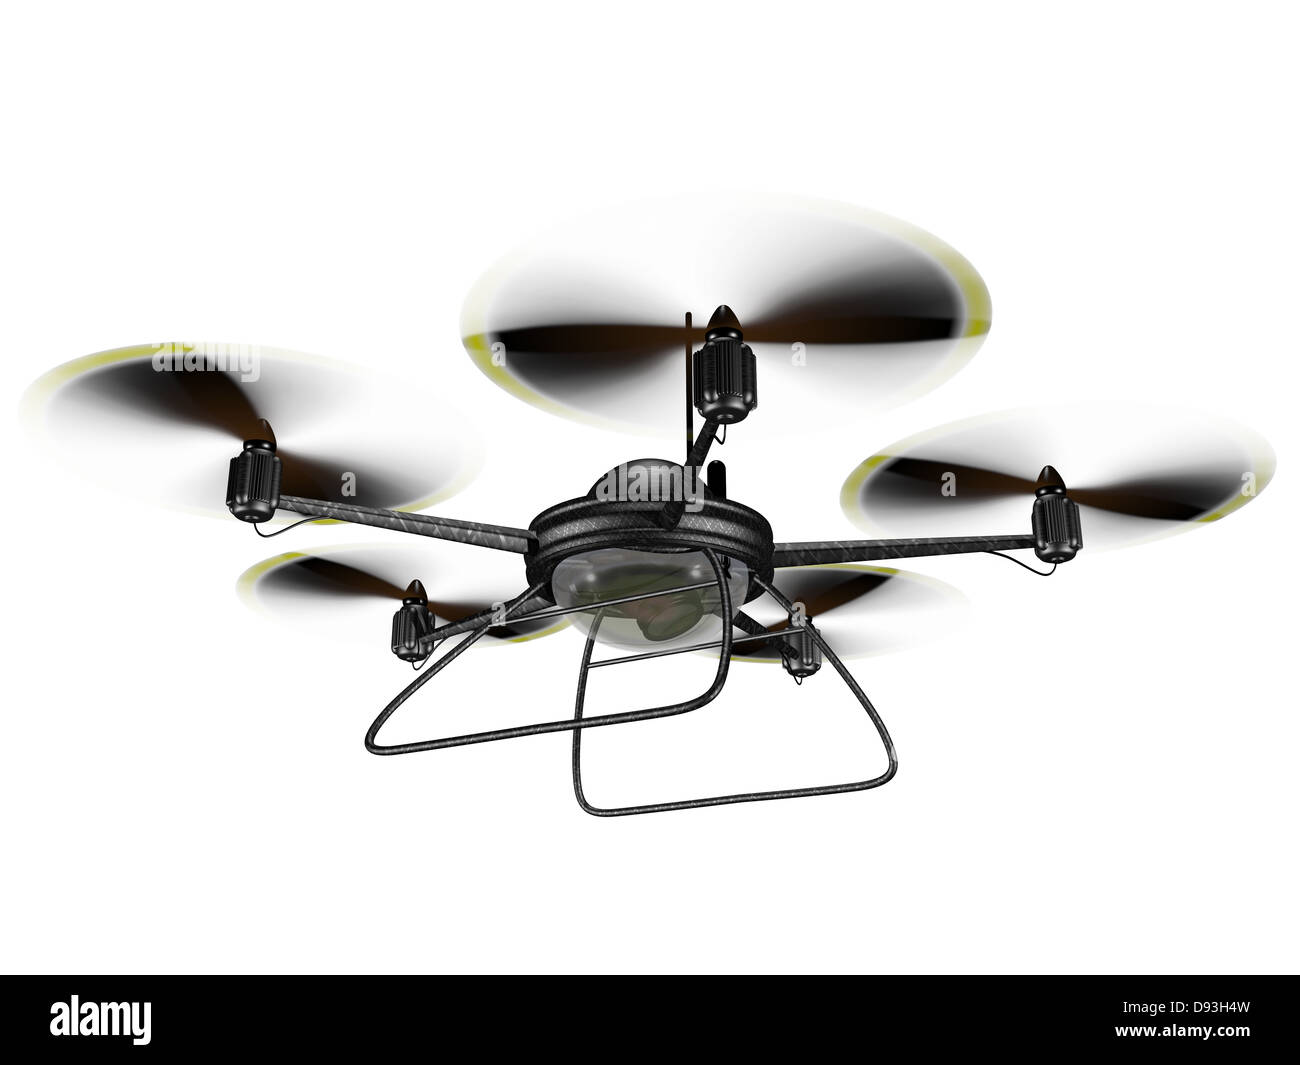 Isolated illustration of a hovering spy drone Stock Photo